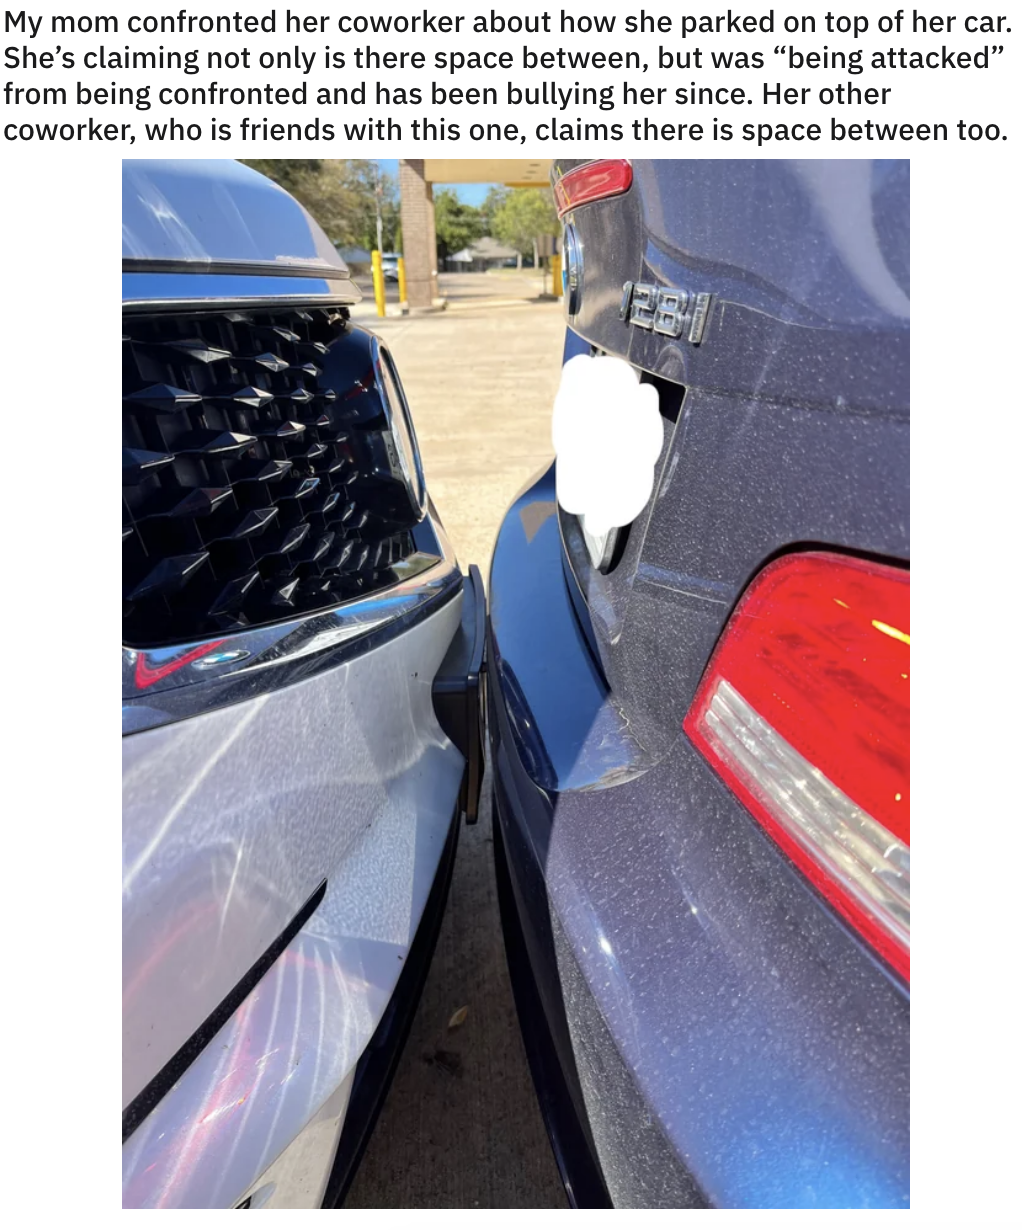 Two cars with no space between them, with a caption that their mom confronted the coworker about the parking, and the coworker said there was enough space and they were being &quot;attacked&quot;